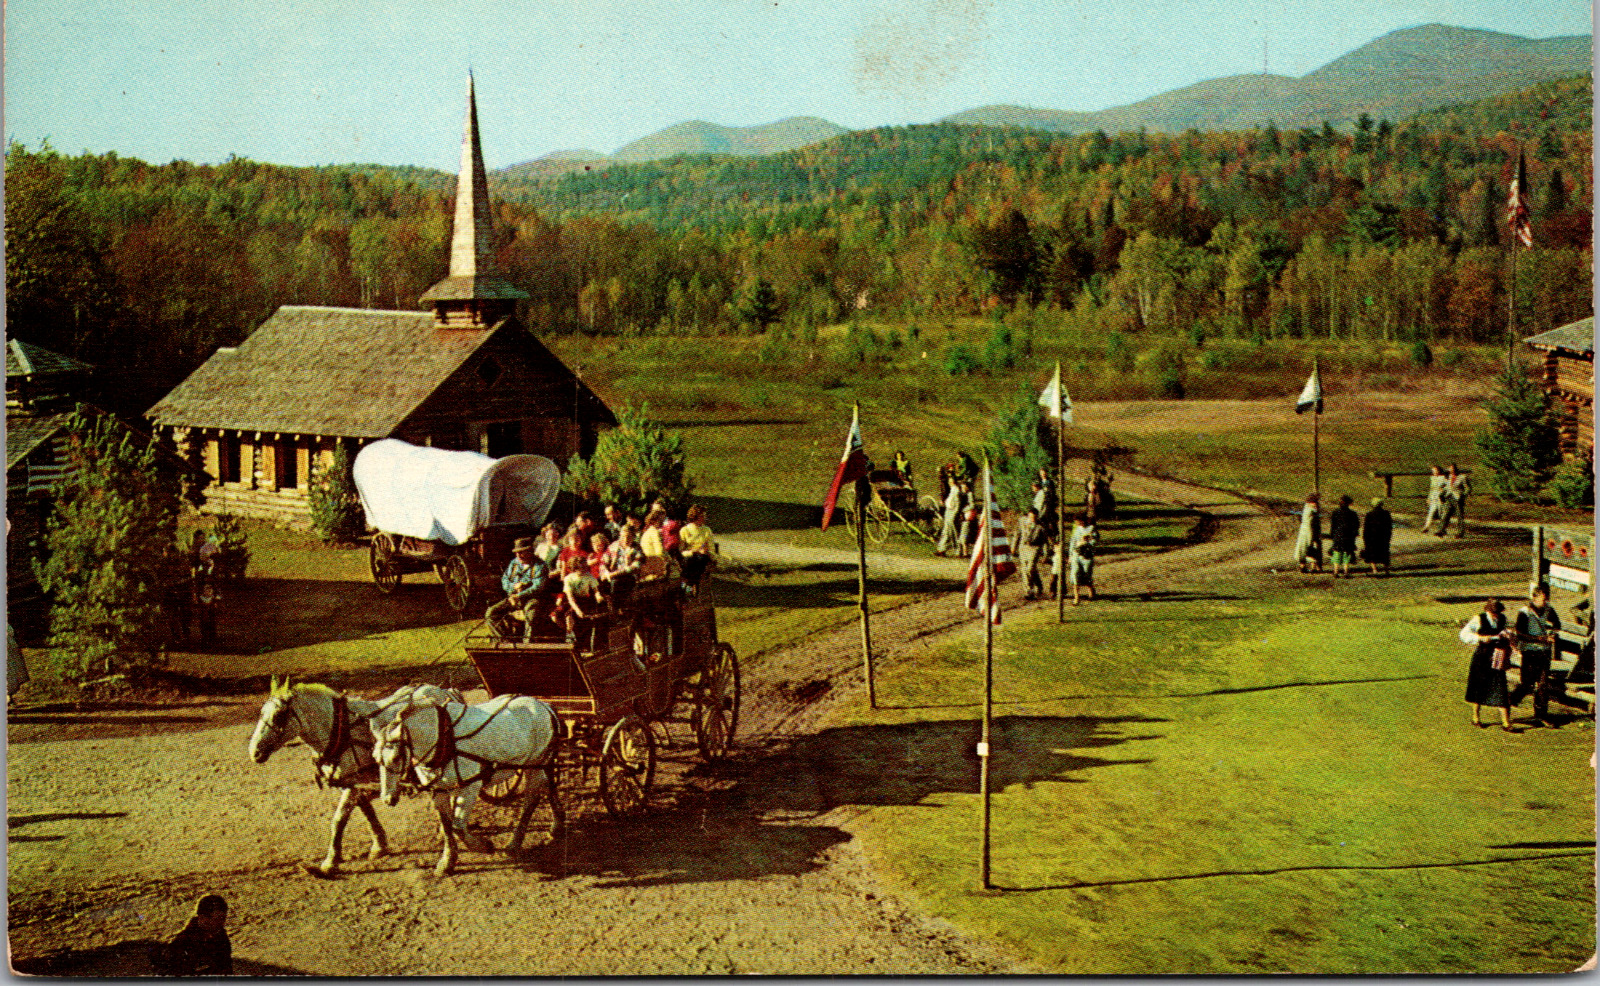 Vintage C. 1960s Stage Coach at Frontier Town Schroon Lake New York NY Postcard